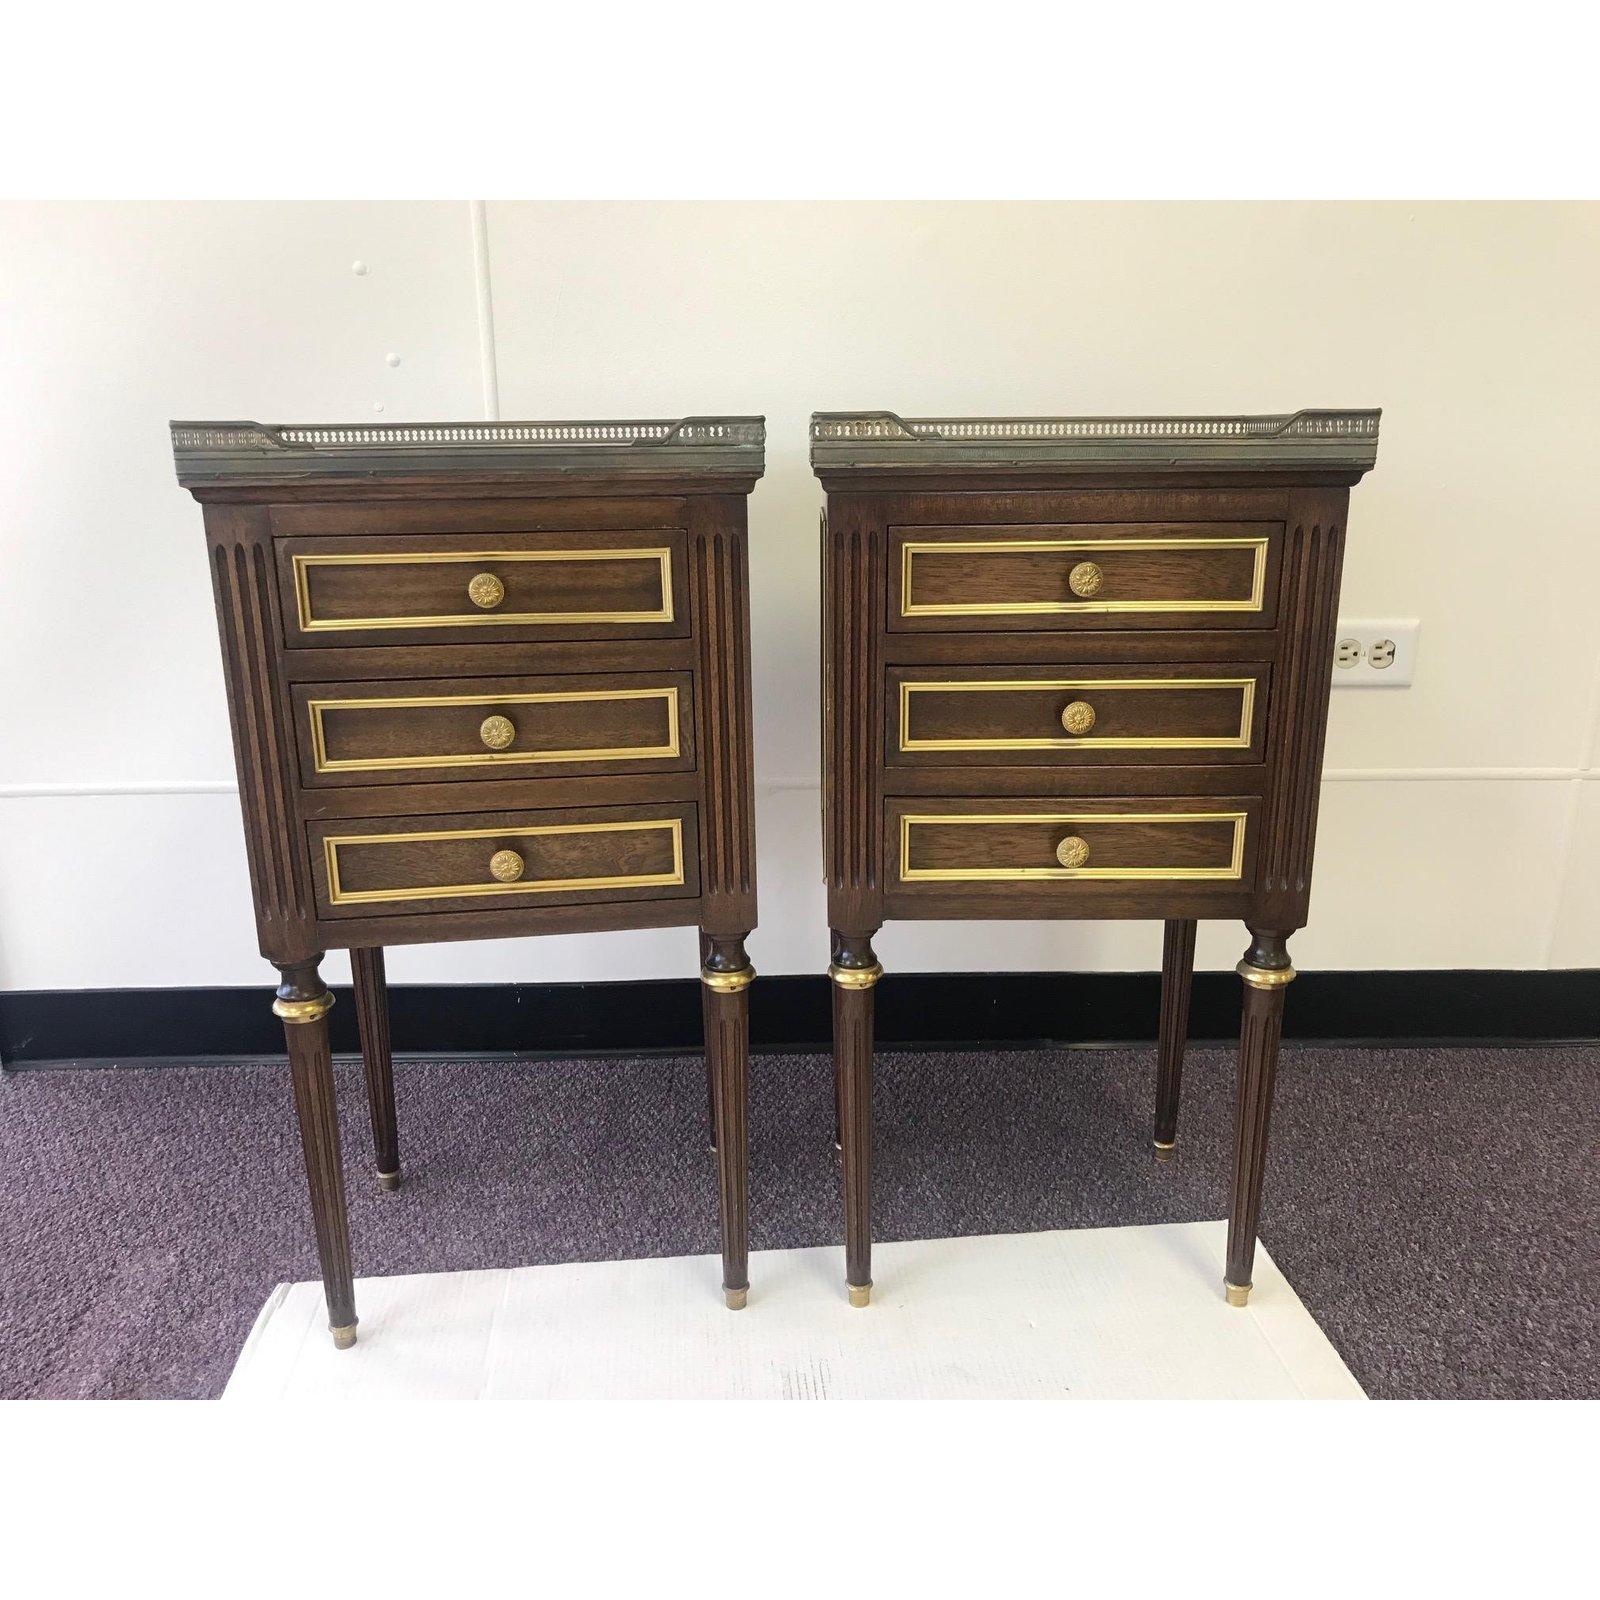 Pair of vintage French side tables from the Brittany region of France that are a rare find in this condition and quality. Each is adorned with an original brass gallery around the solid Carrara marble top, brass also accents the front of all three